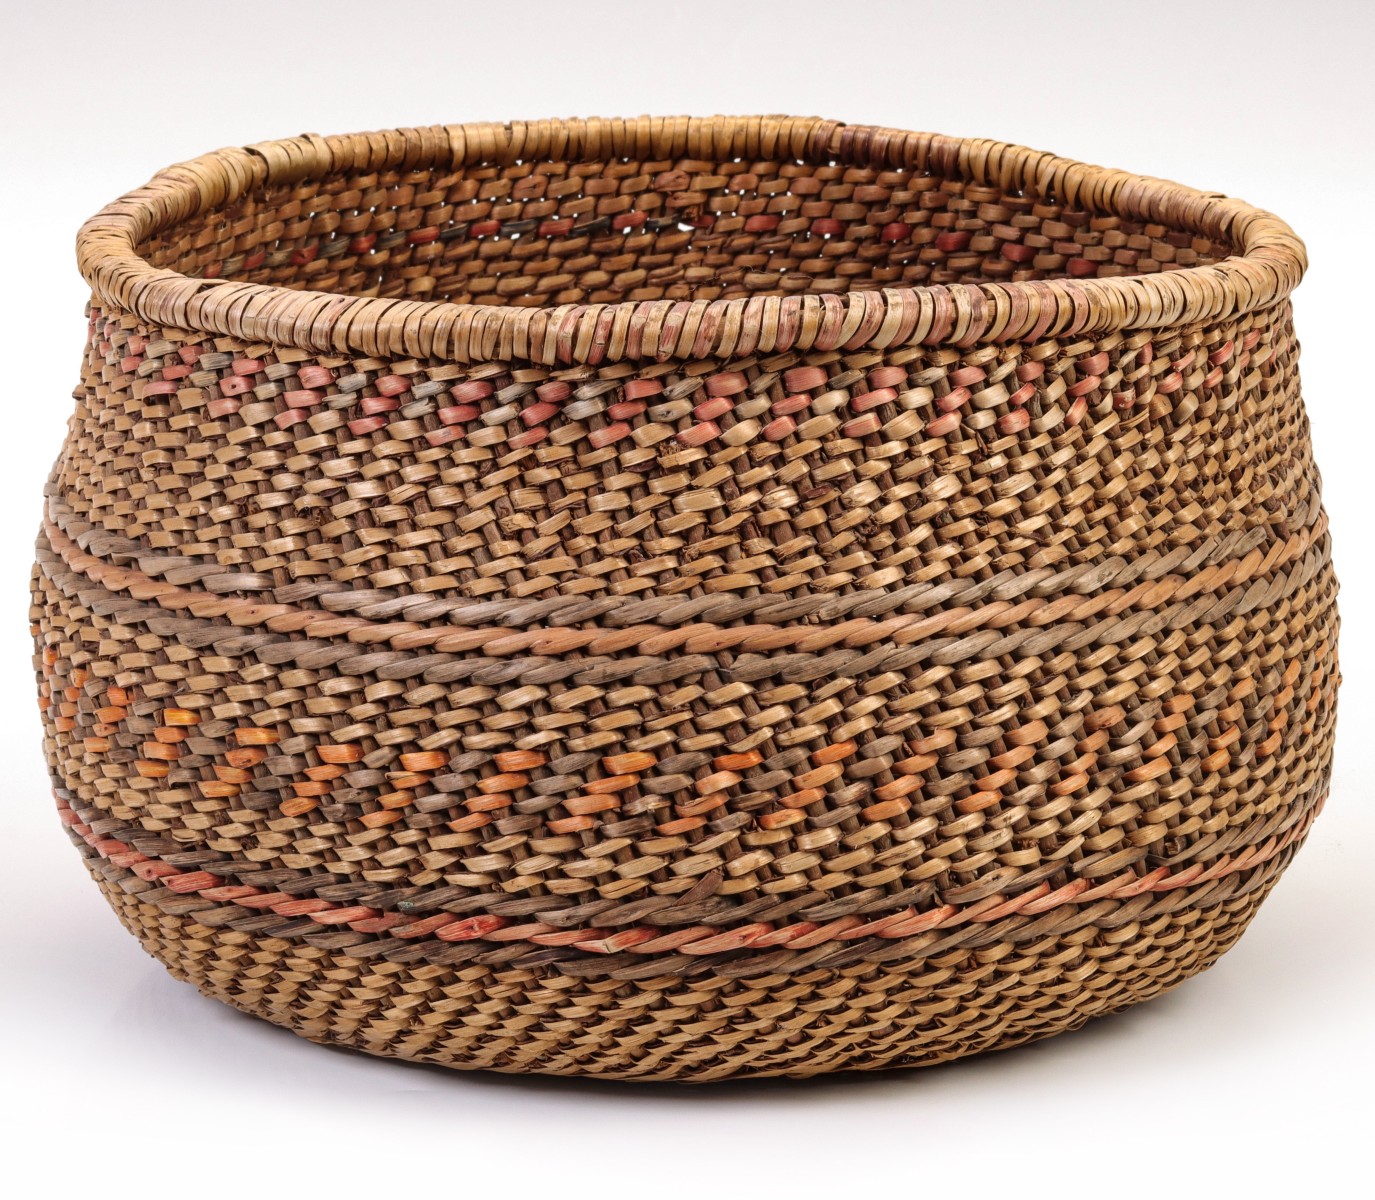 A CALIFORNIA HAVASUPI TWINED BASKETRY BOWL WITH COLORS